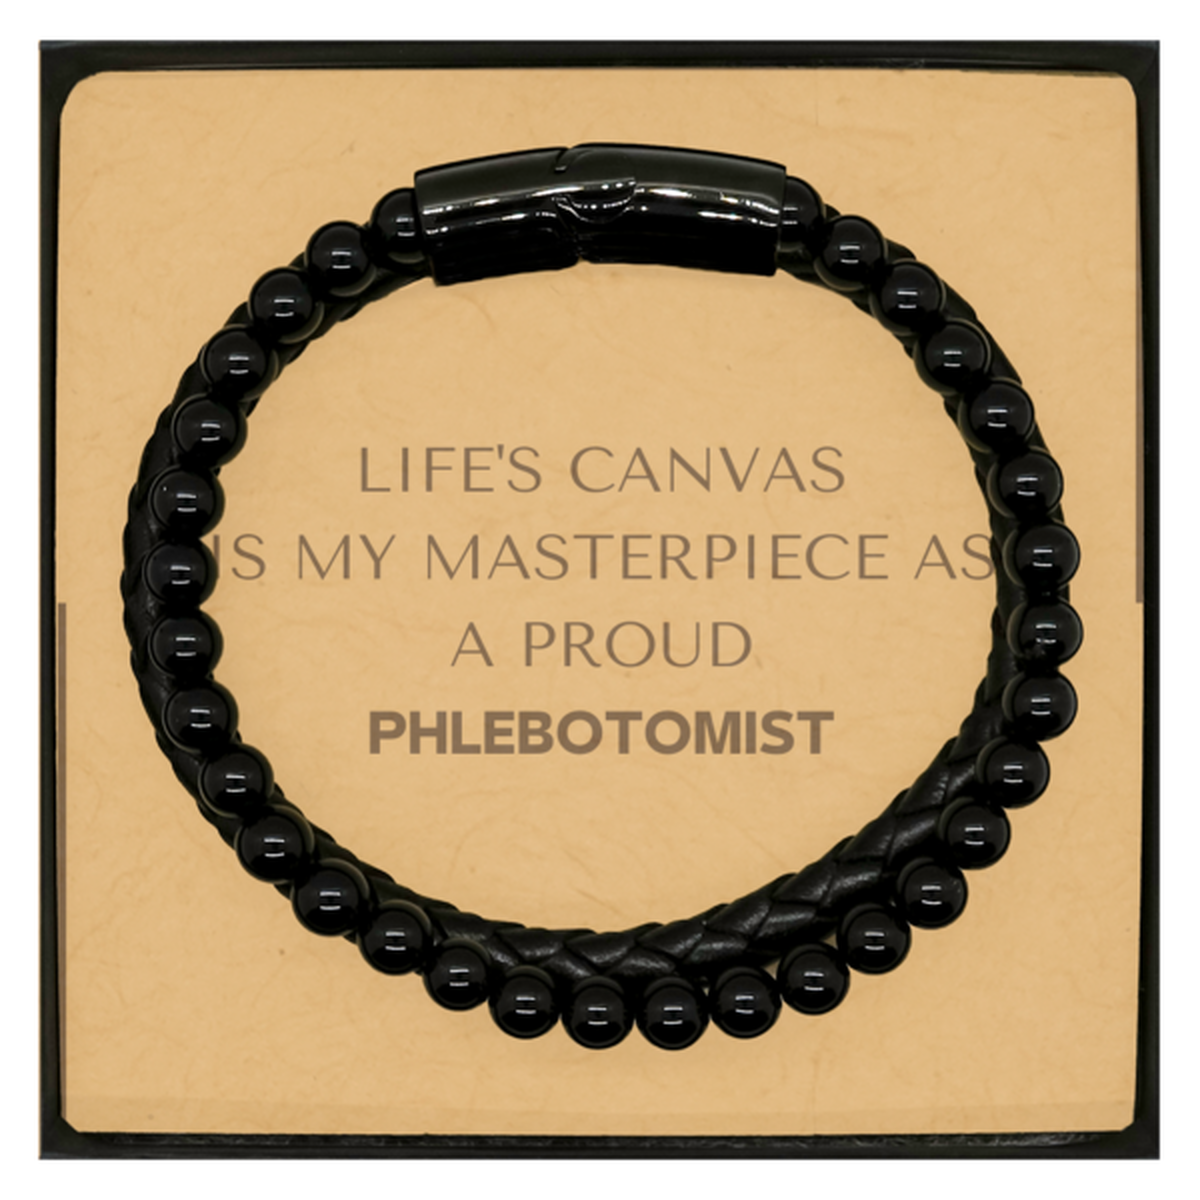 Proud Phlebotomist Gifts, Life's canvas is my masterpiece, Epic Birthday Christmas Unique Stone Leather Bracelets For Phlebotomist, Coworkers, Men, Women, Friends